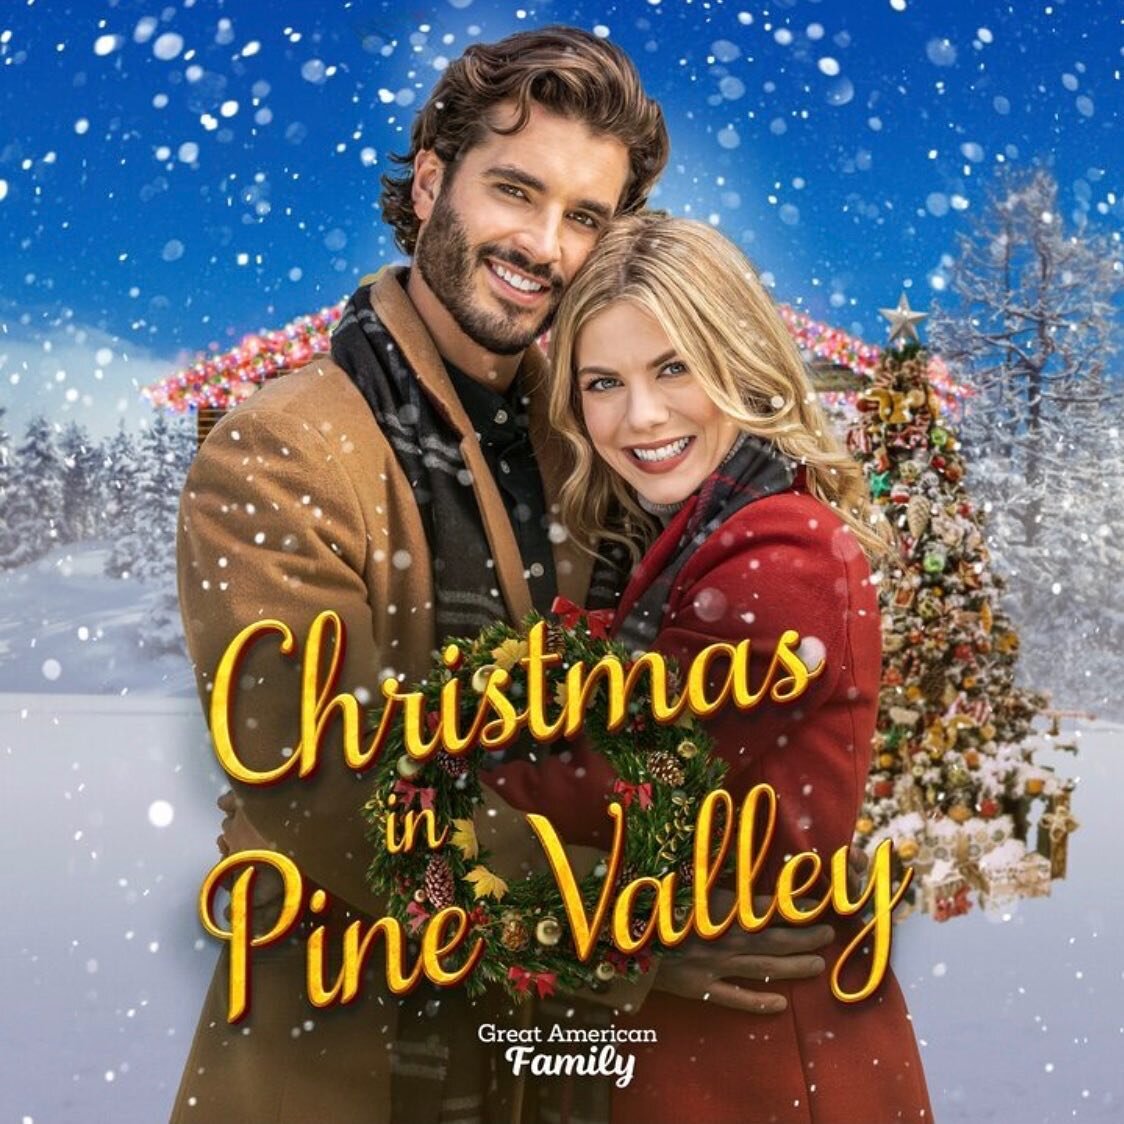 Had the privilege of working with @brooksball and writing some music for #christmasinpinevalley which is now on @gactv 🎄🎅🏽
Listen closely on the dance scenes 👀